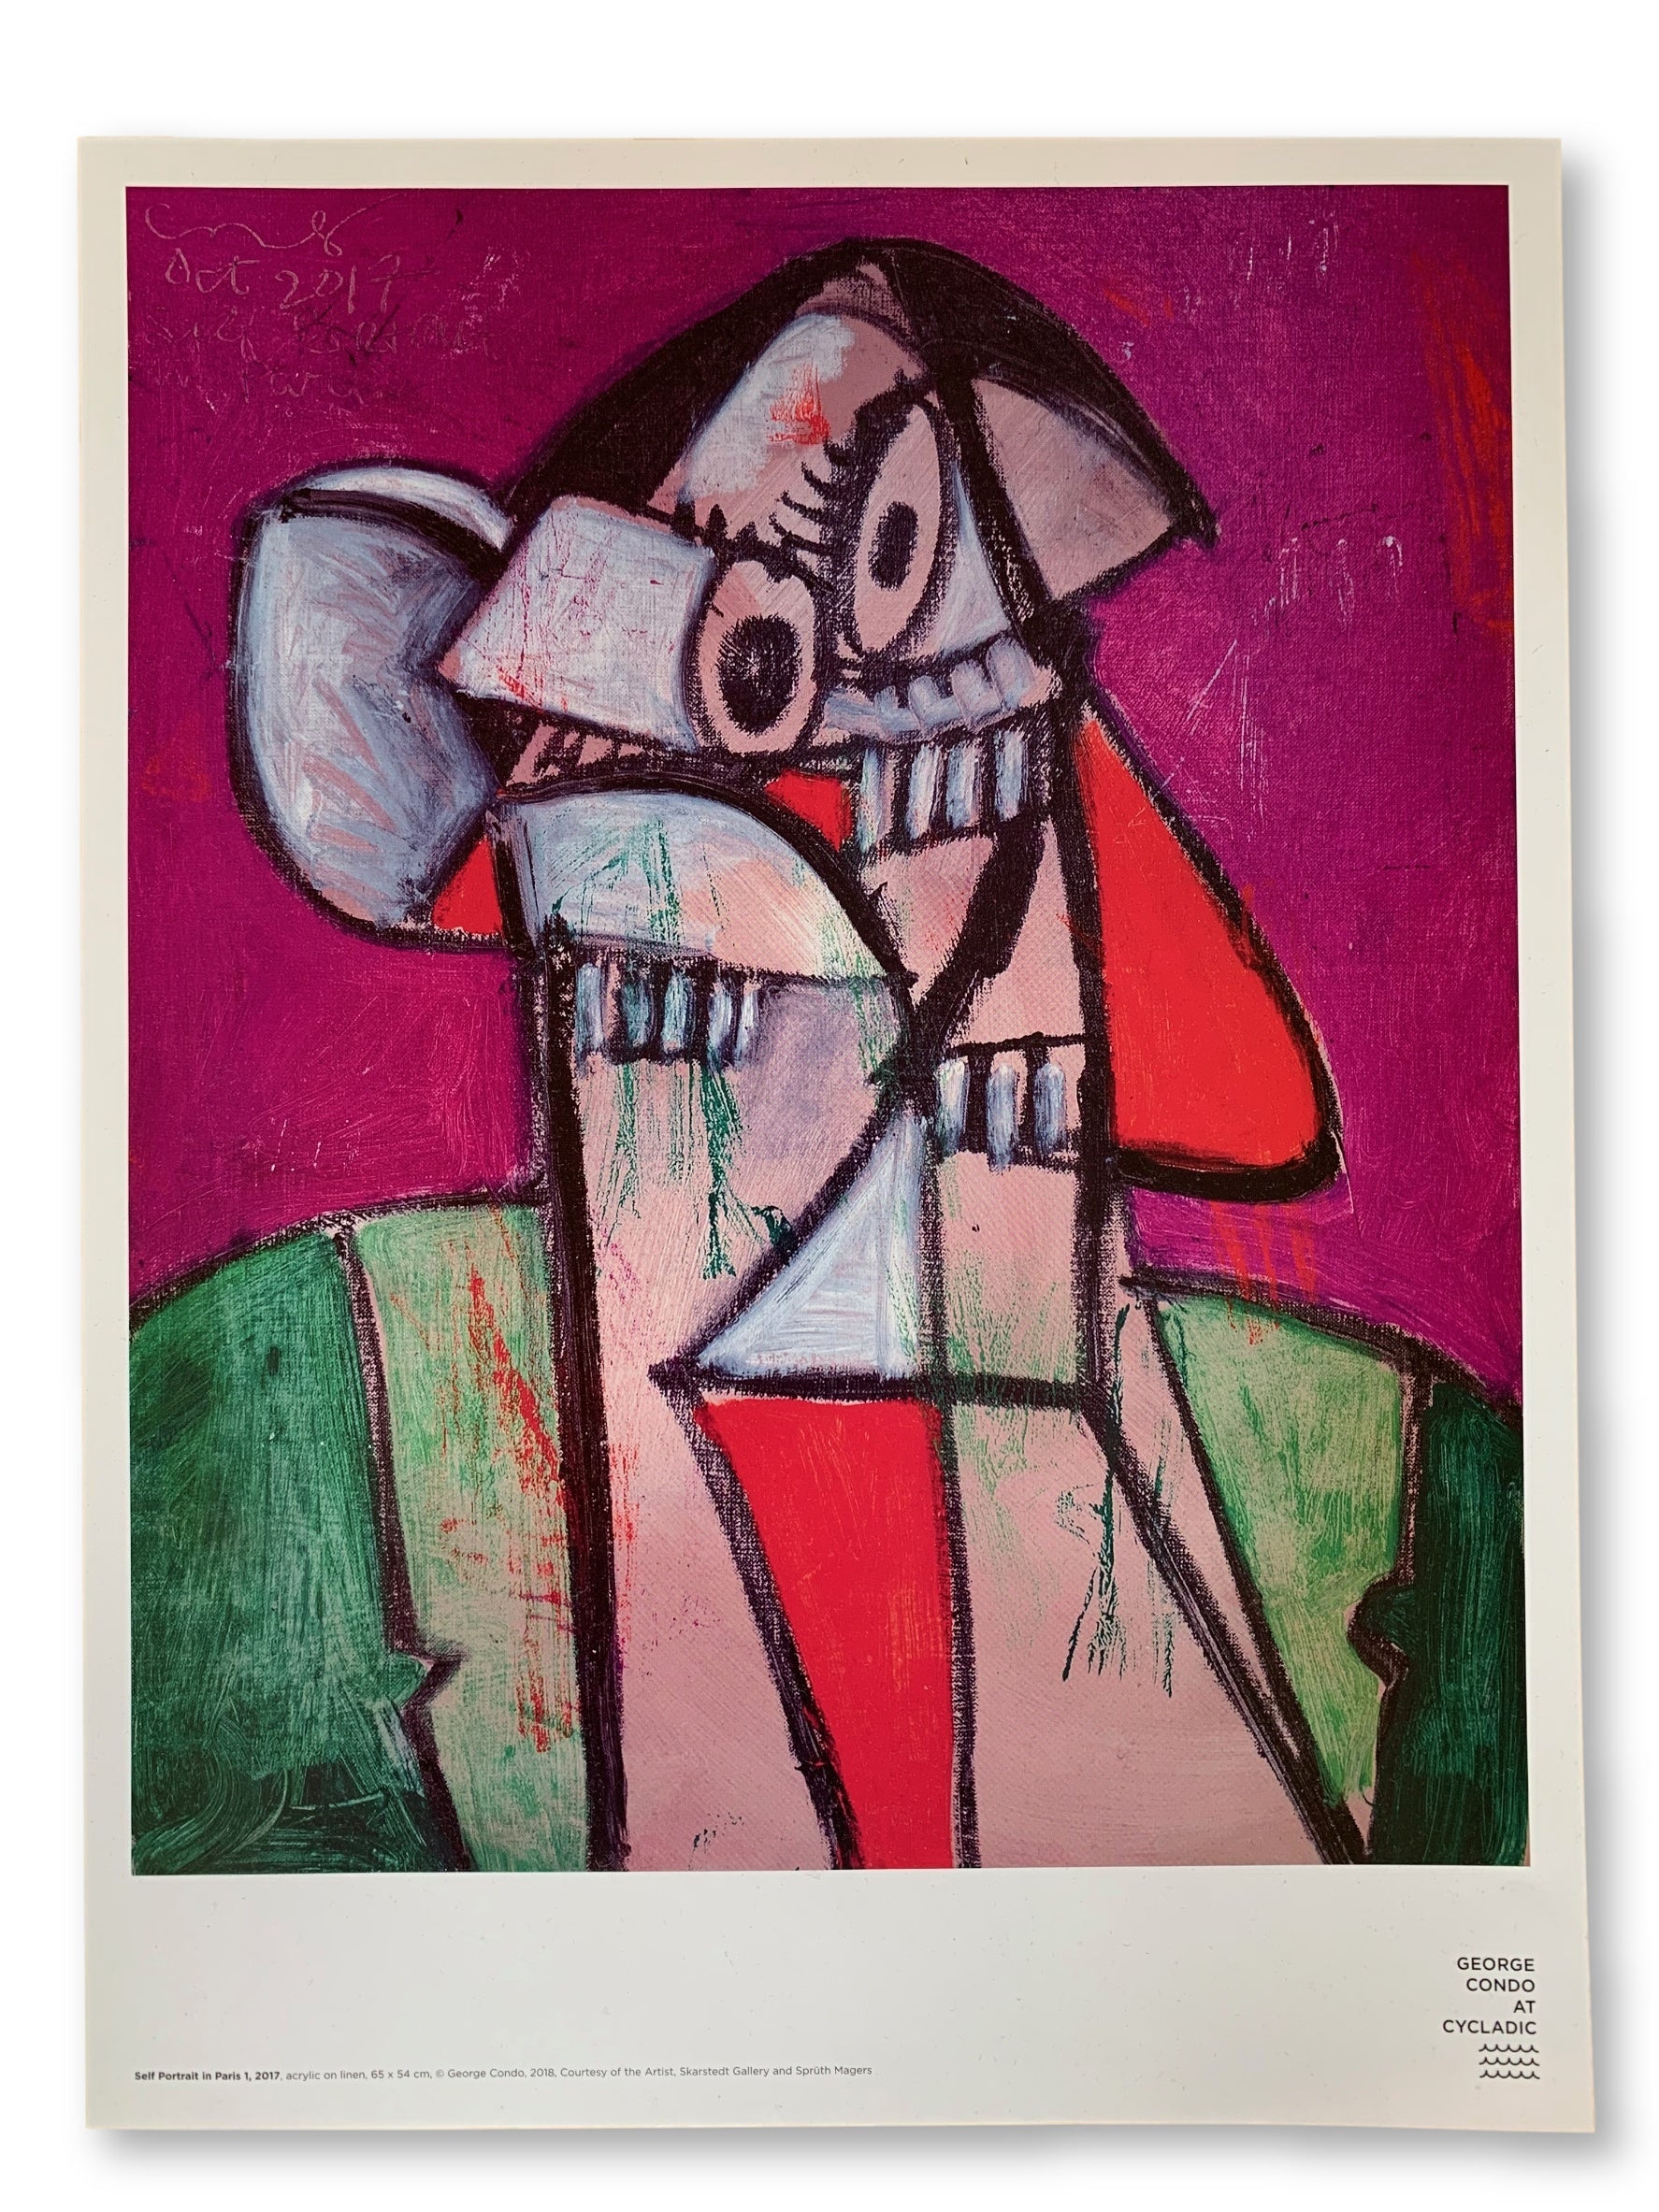 George Condo at Cycladic Exhibition - Poster (A)